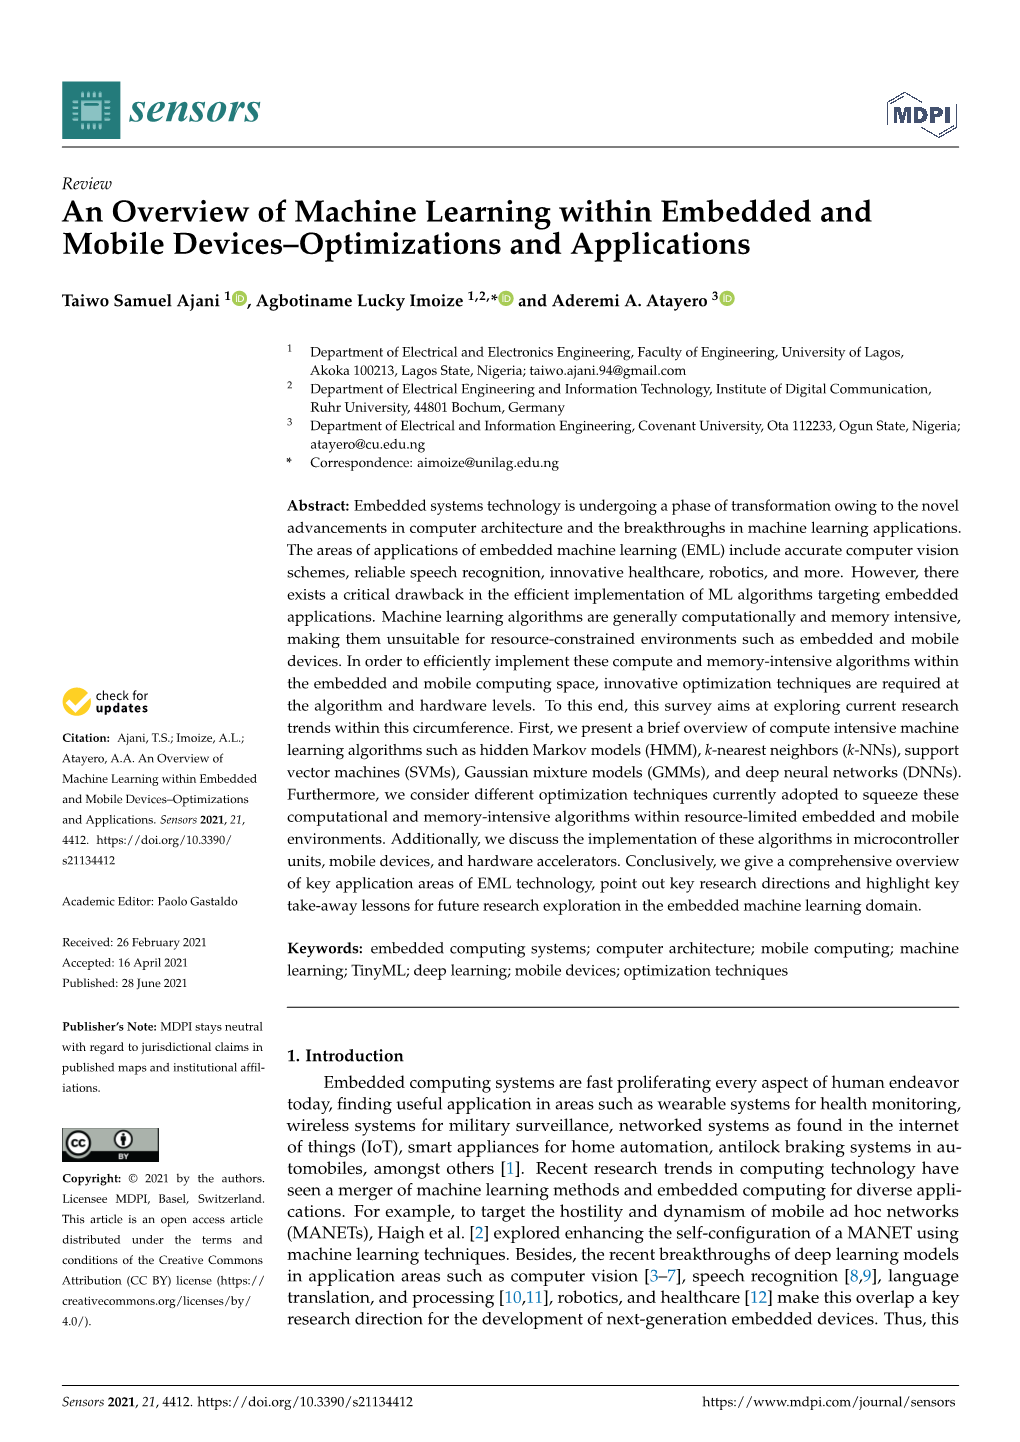 An Overview of Machine Learning Within Embedded and Mobile Devices–Optimizations and Applications